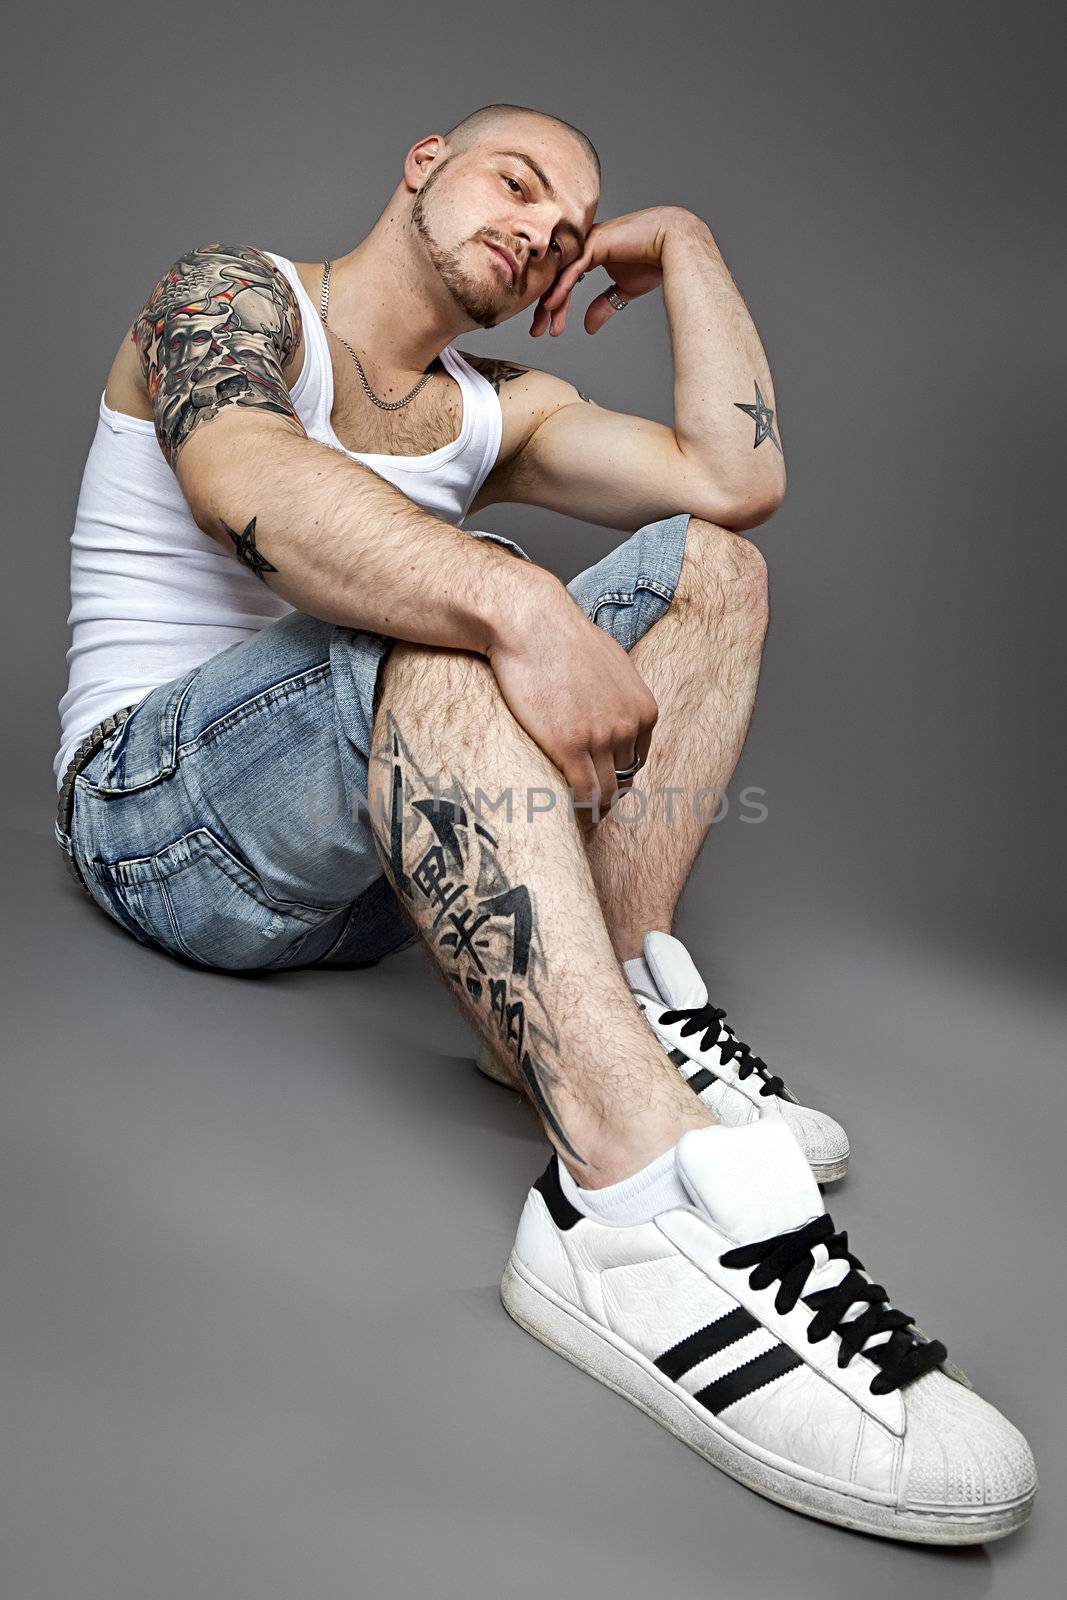 An image of a handsome man with tattoos